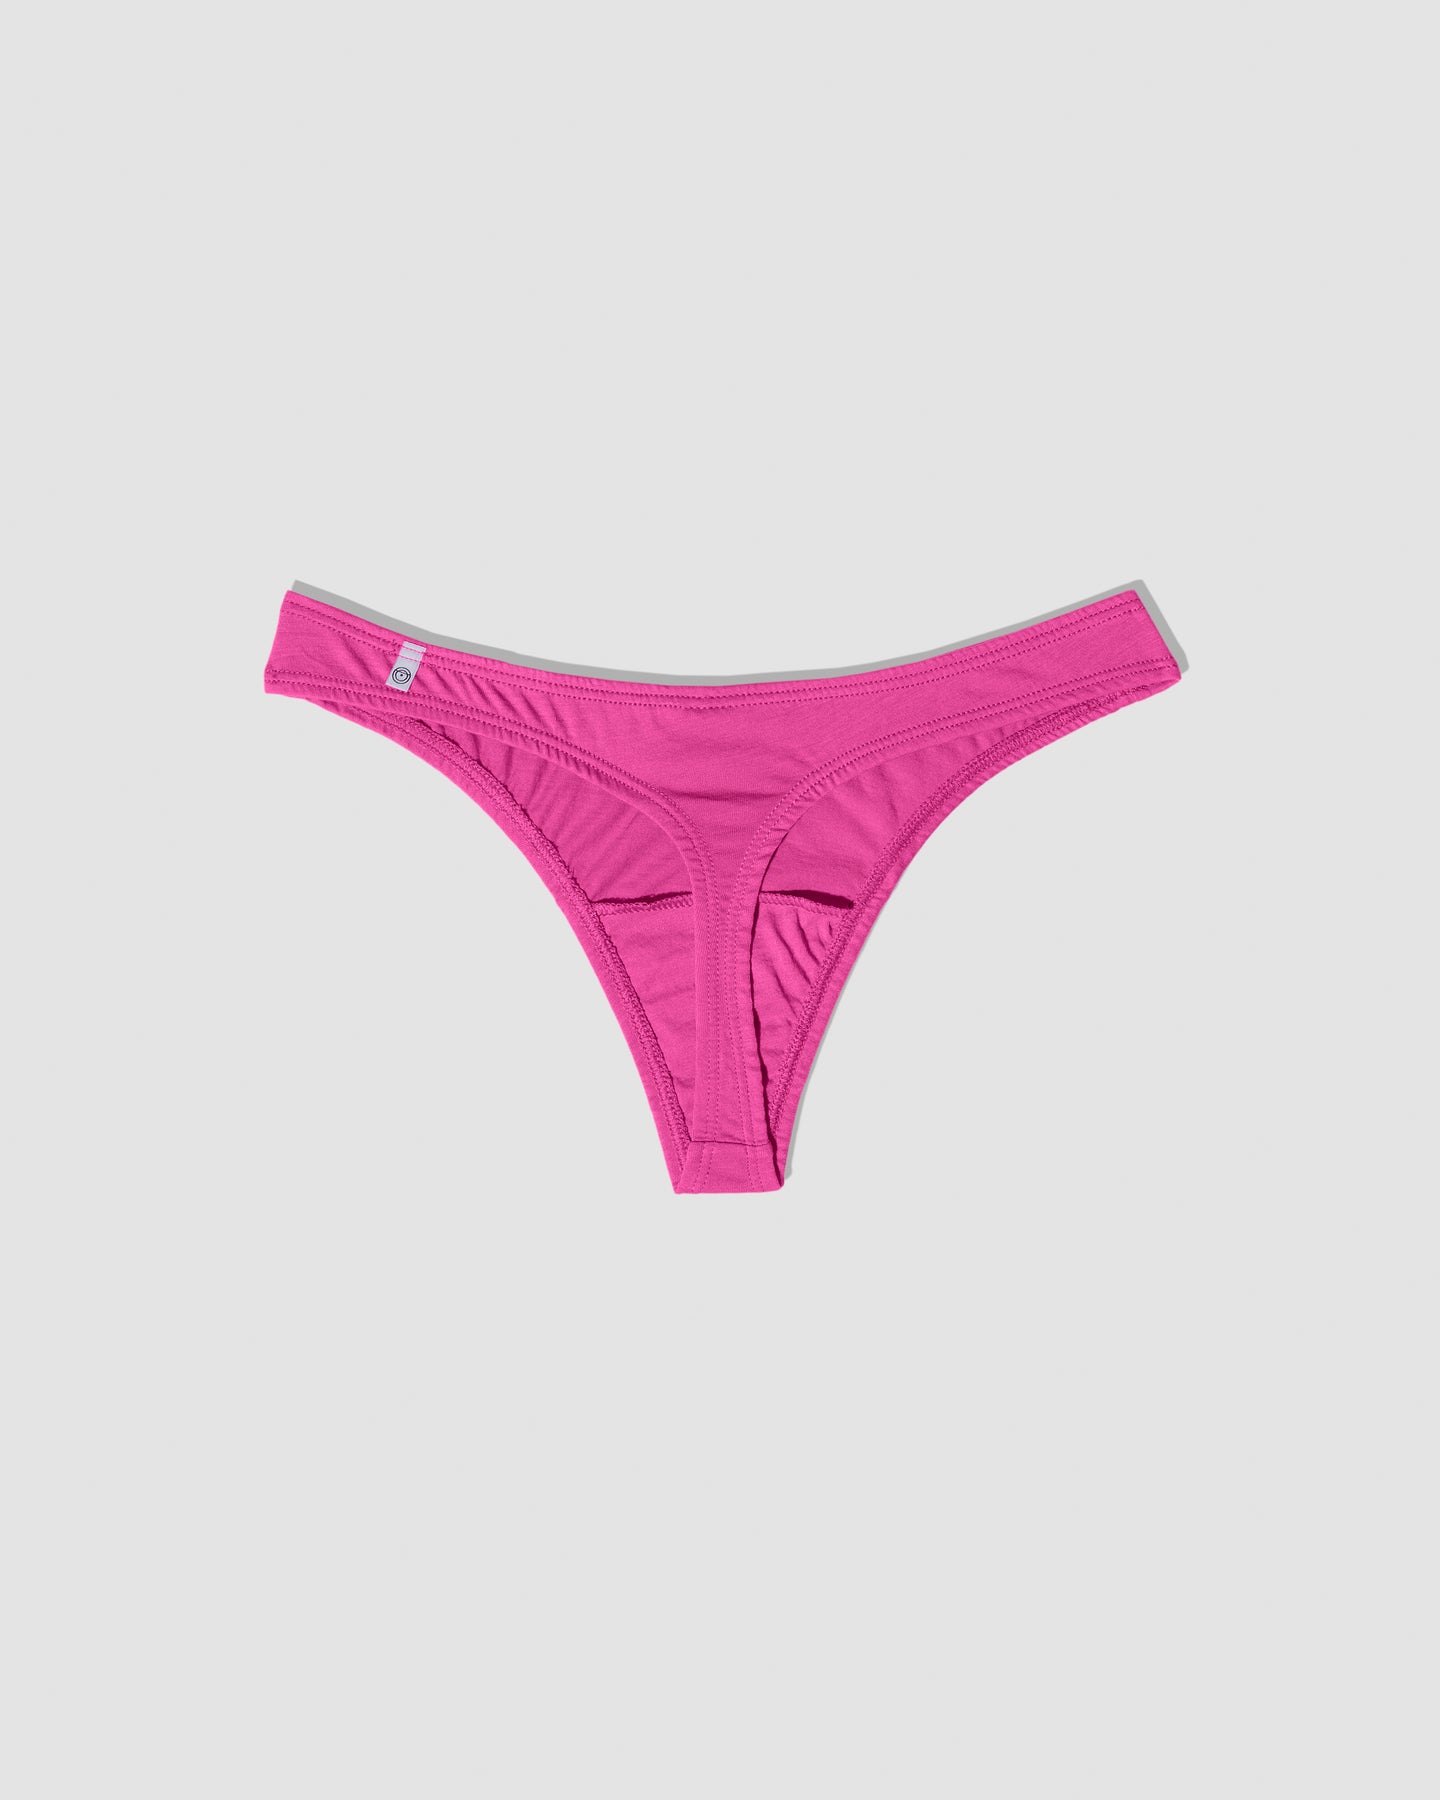 Unbranded 100% Cotton Thong/String Panties for Women for sale